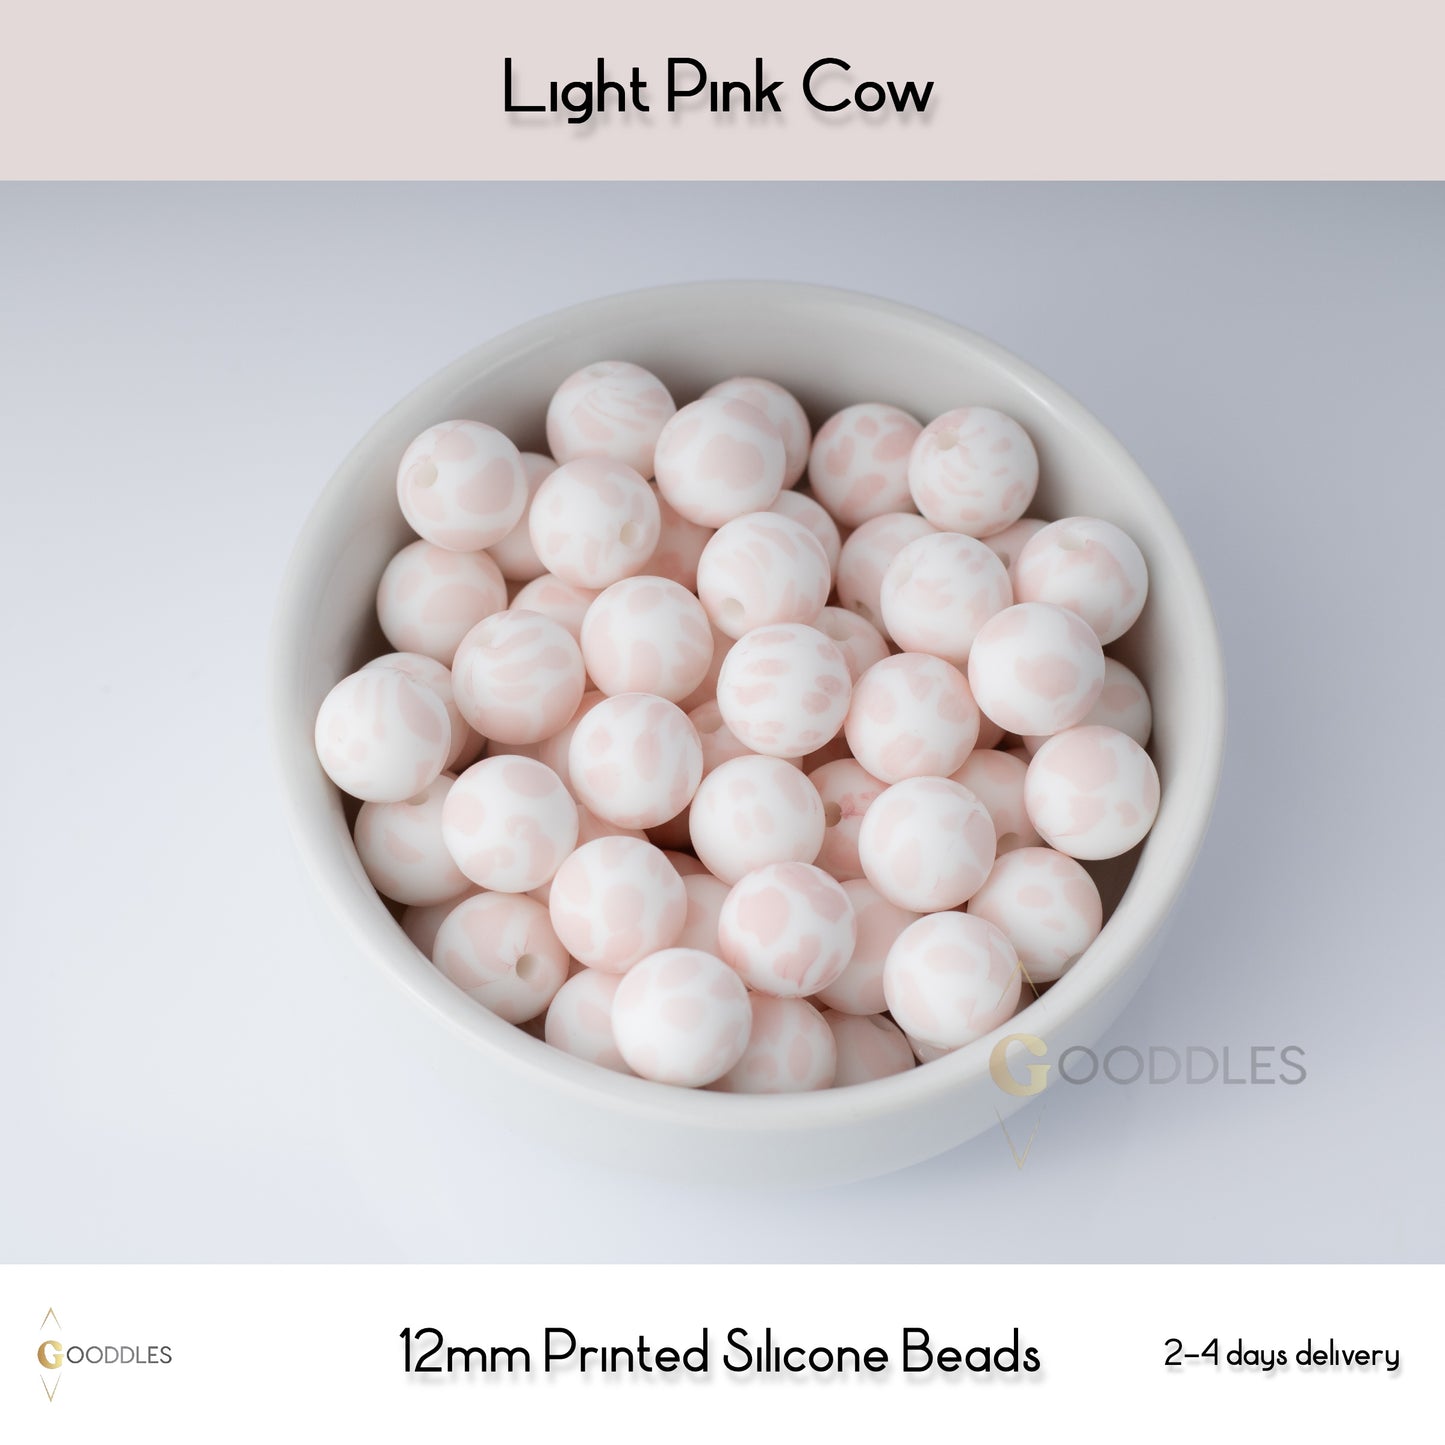 5pcs, Light Pink Cow Silicone Beads Printed Round Silicone Beads